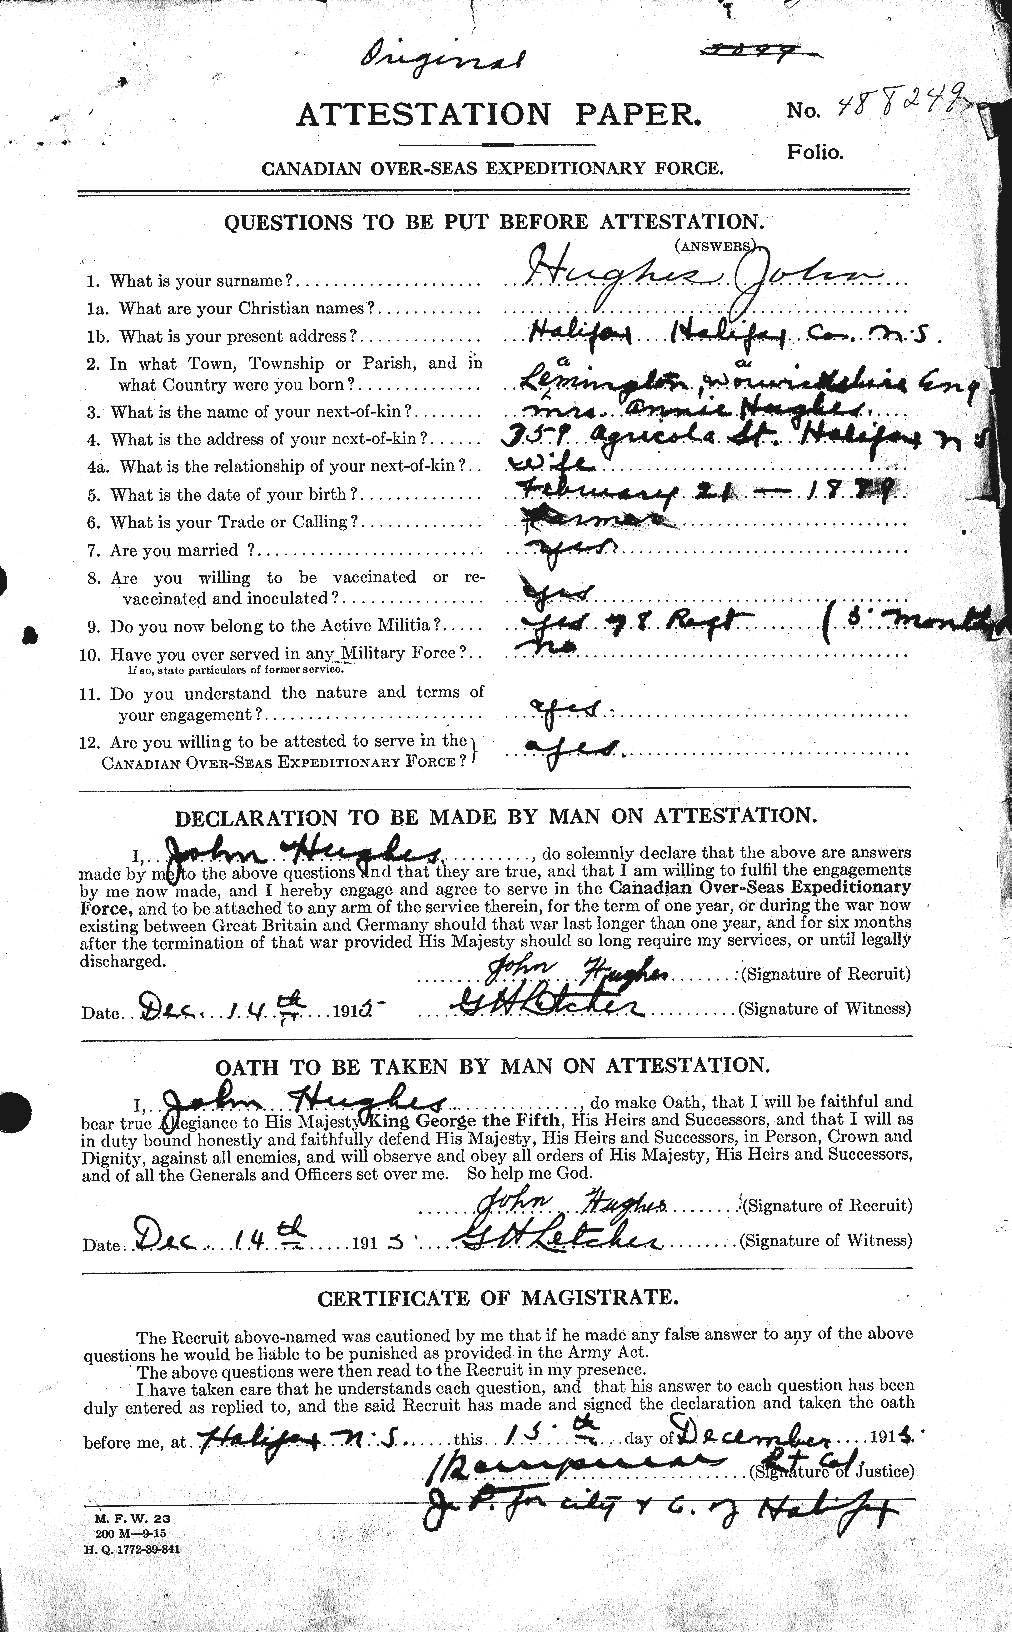 Personnel Records of the First World War - CEF 403994a